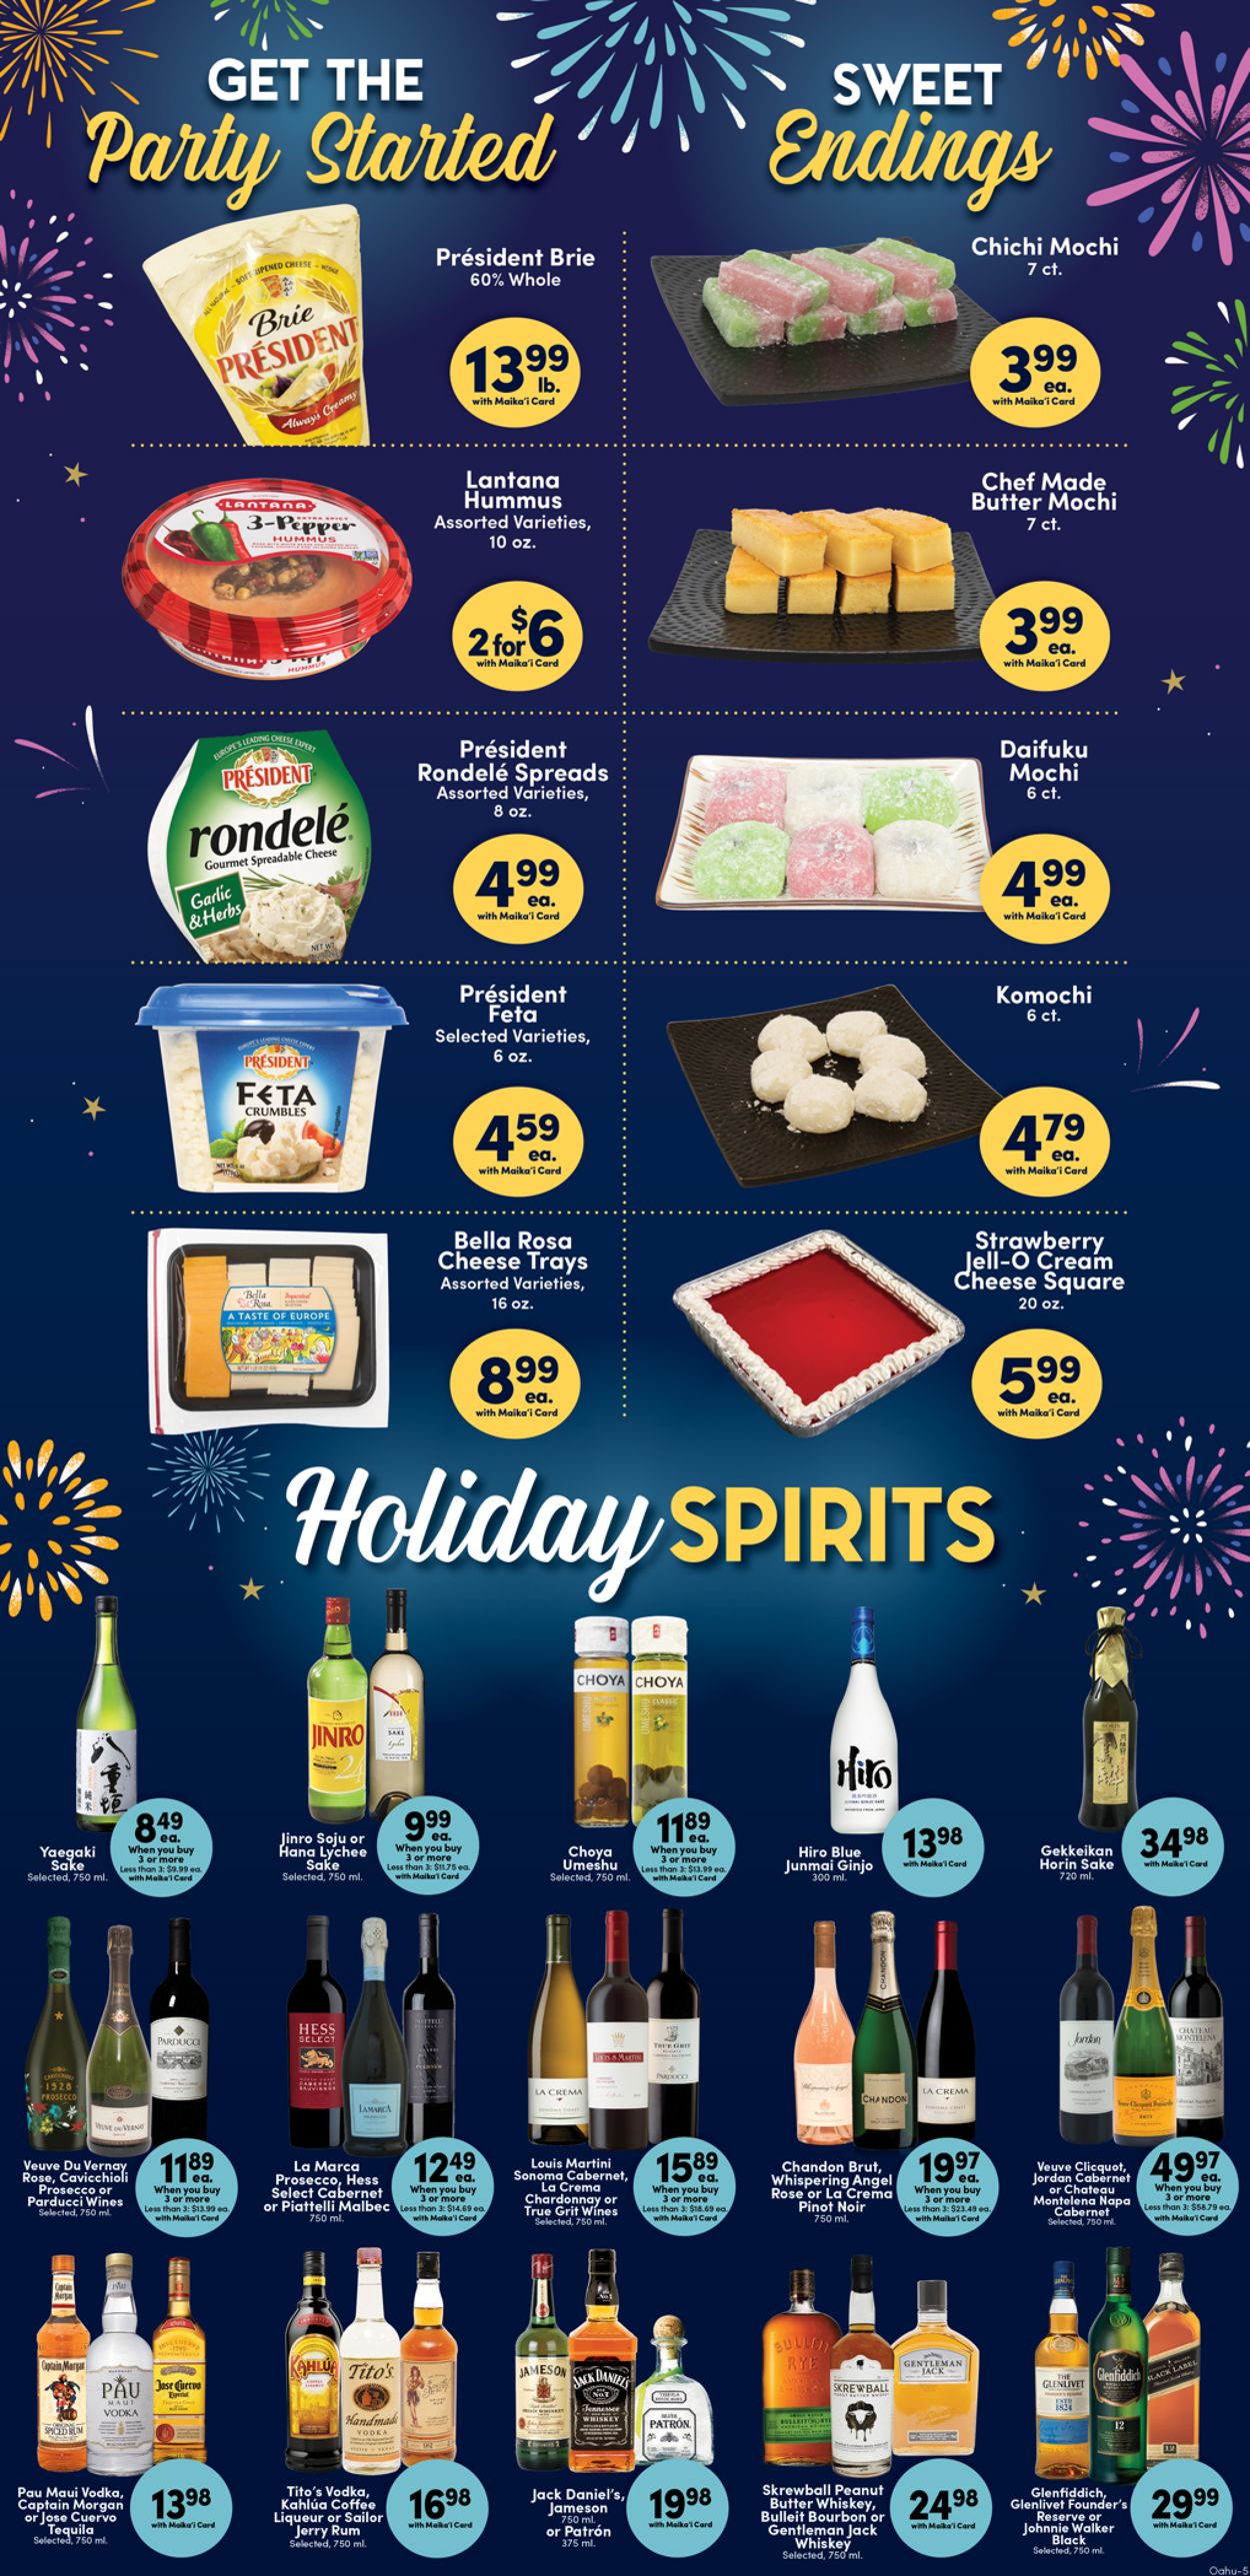 Catalogue Foodland - New Year's Ad 2019/2020 from 12/26/2019